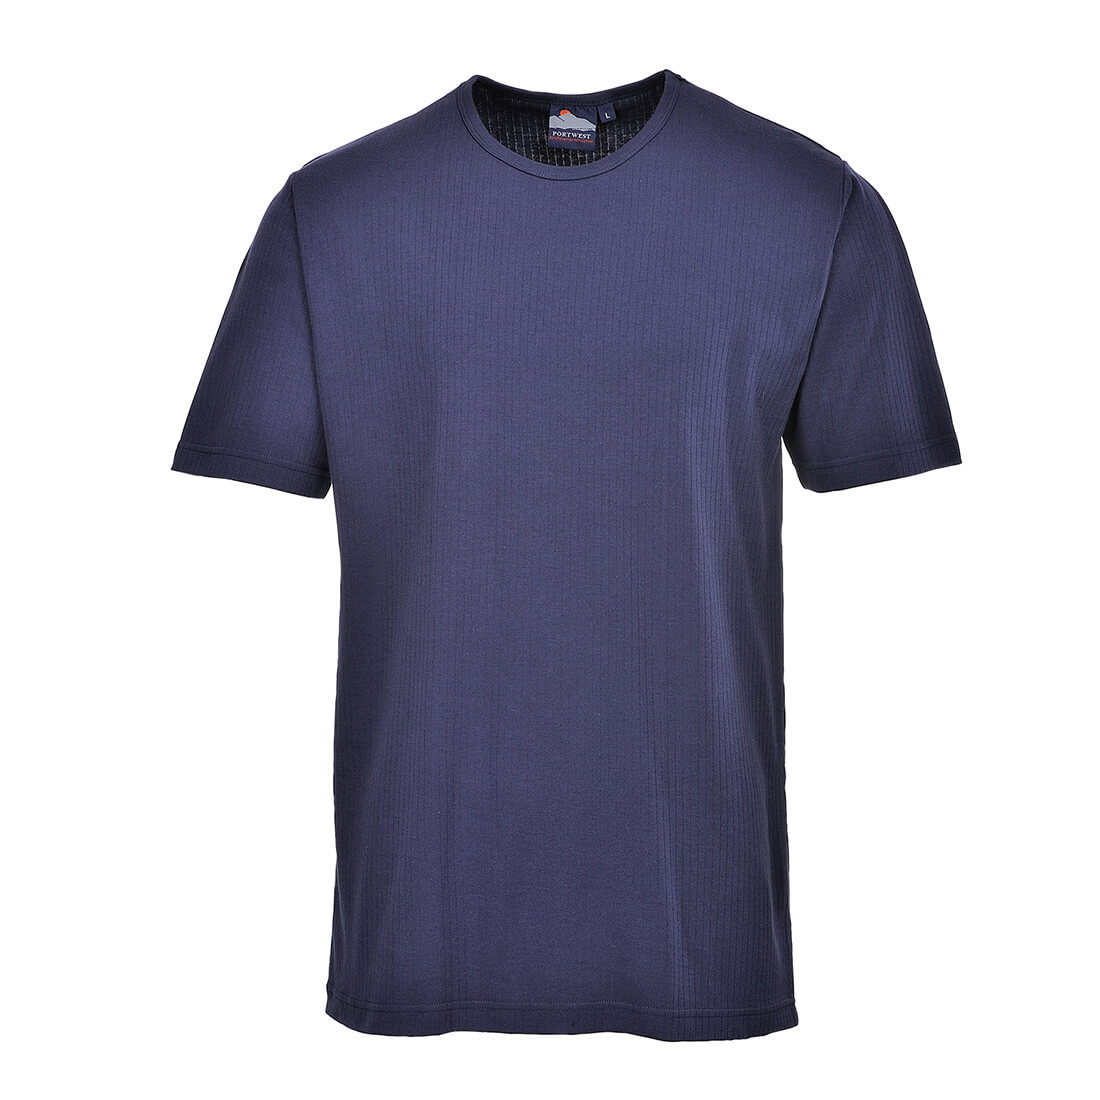 Image of Portwest Thermal Short Sleeve T Shirt Navy 2XL